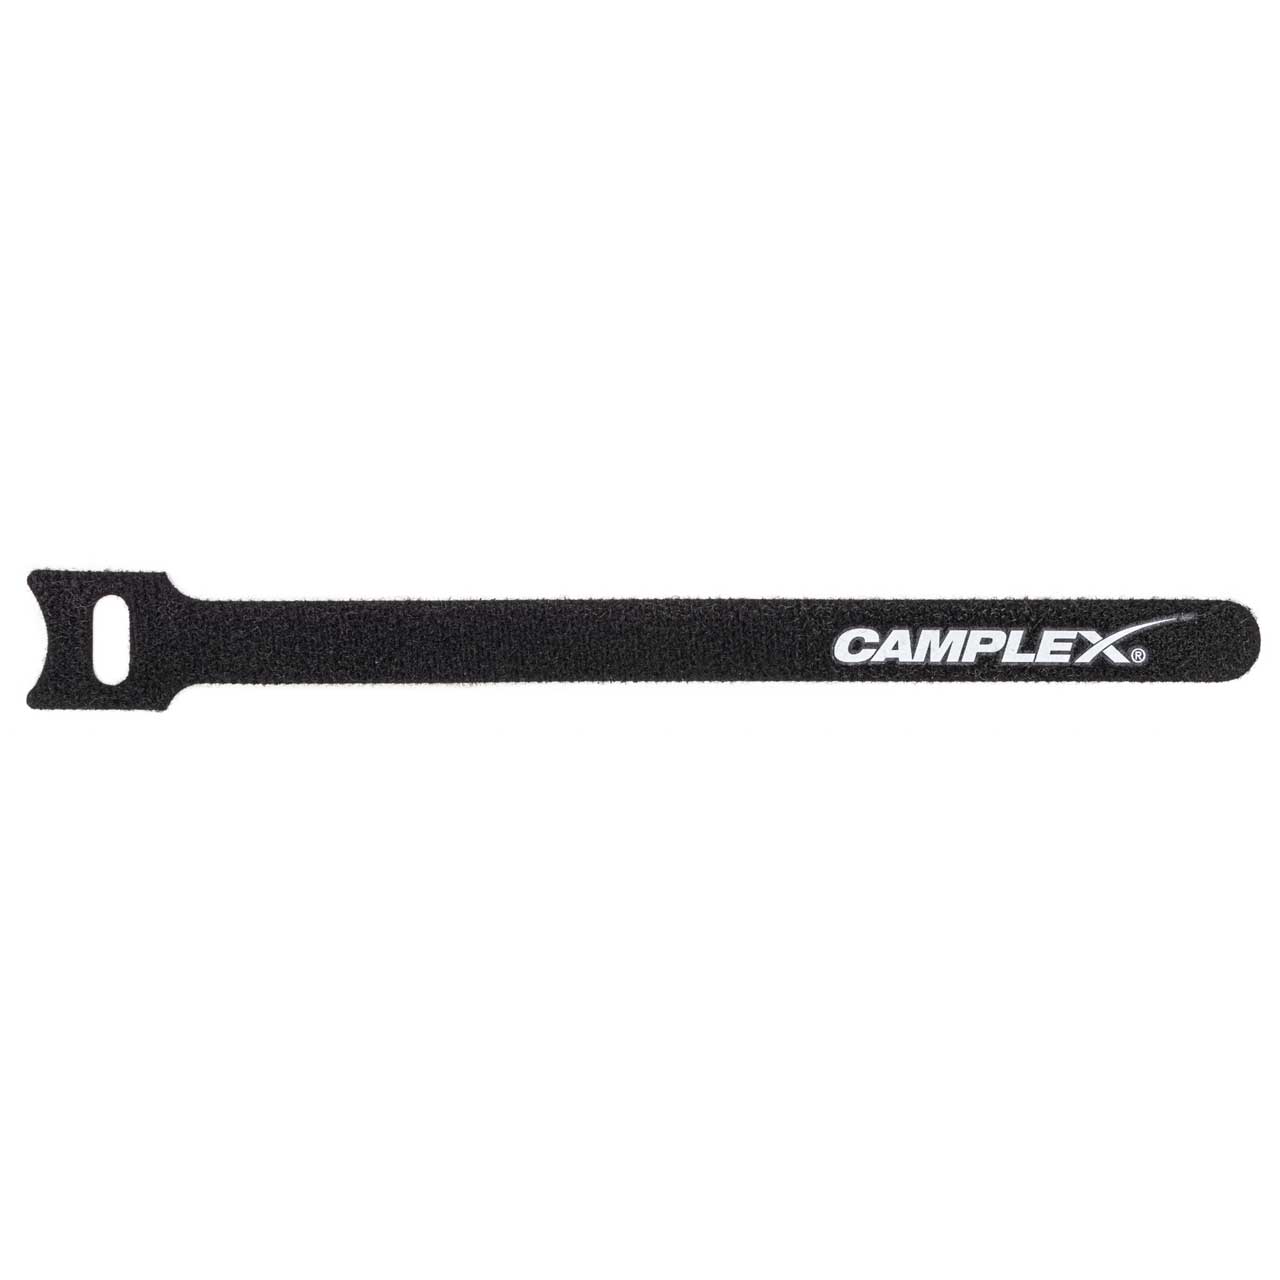 Camplex Hook and Loop Cable Wrap 12mm x 180mm Black with White Logo - 10 Pack CMX-HKNLP-10PK